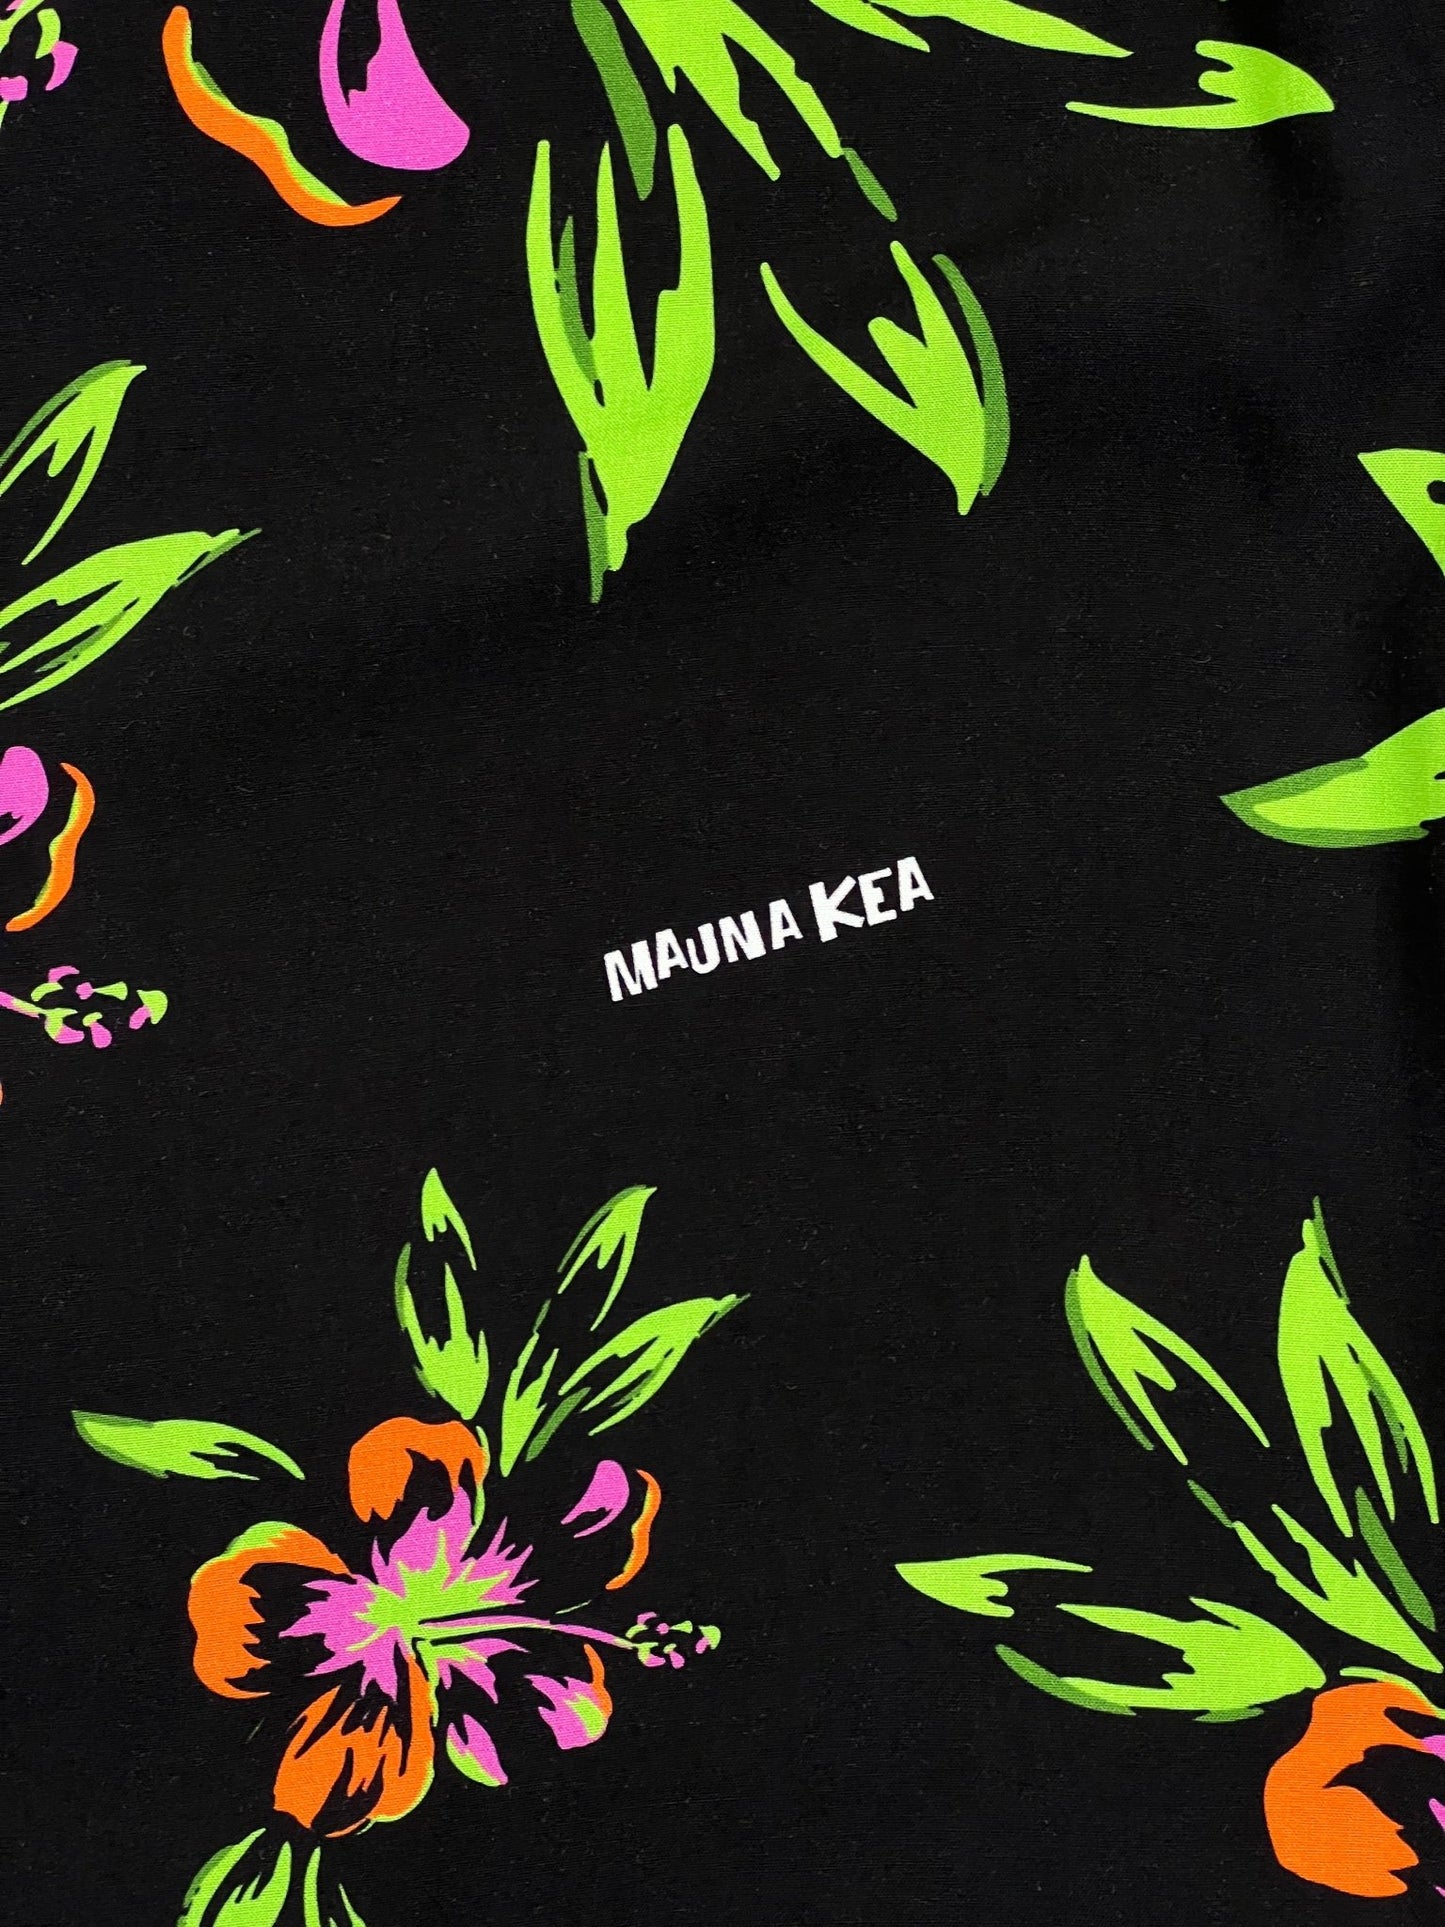 A close-up of a MAUNA-KEA MKU142-FL floral shirt in vibrant green, orange, and pink colors on a black background. The text "mauna kea" is printed in white.